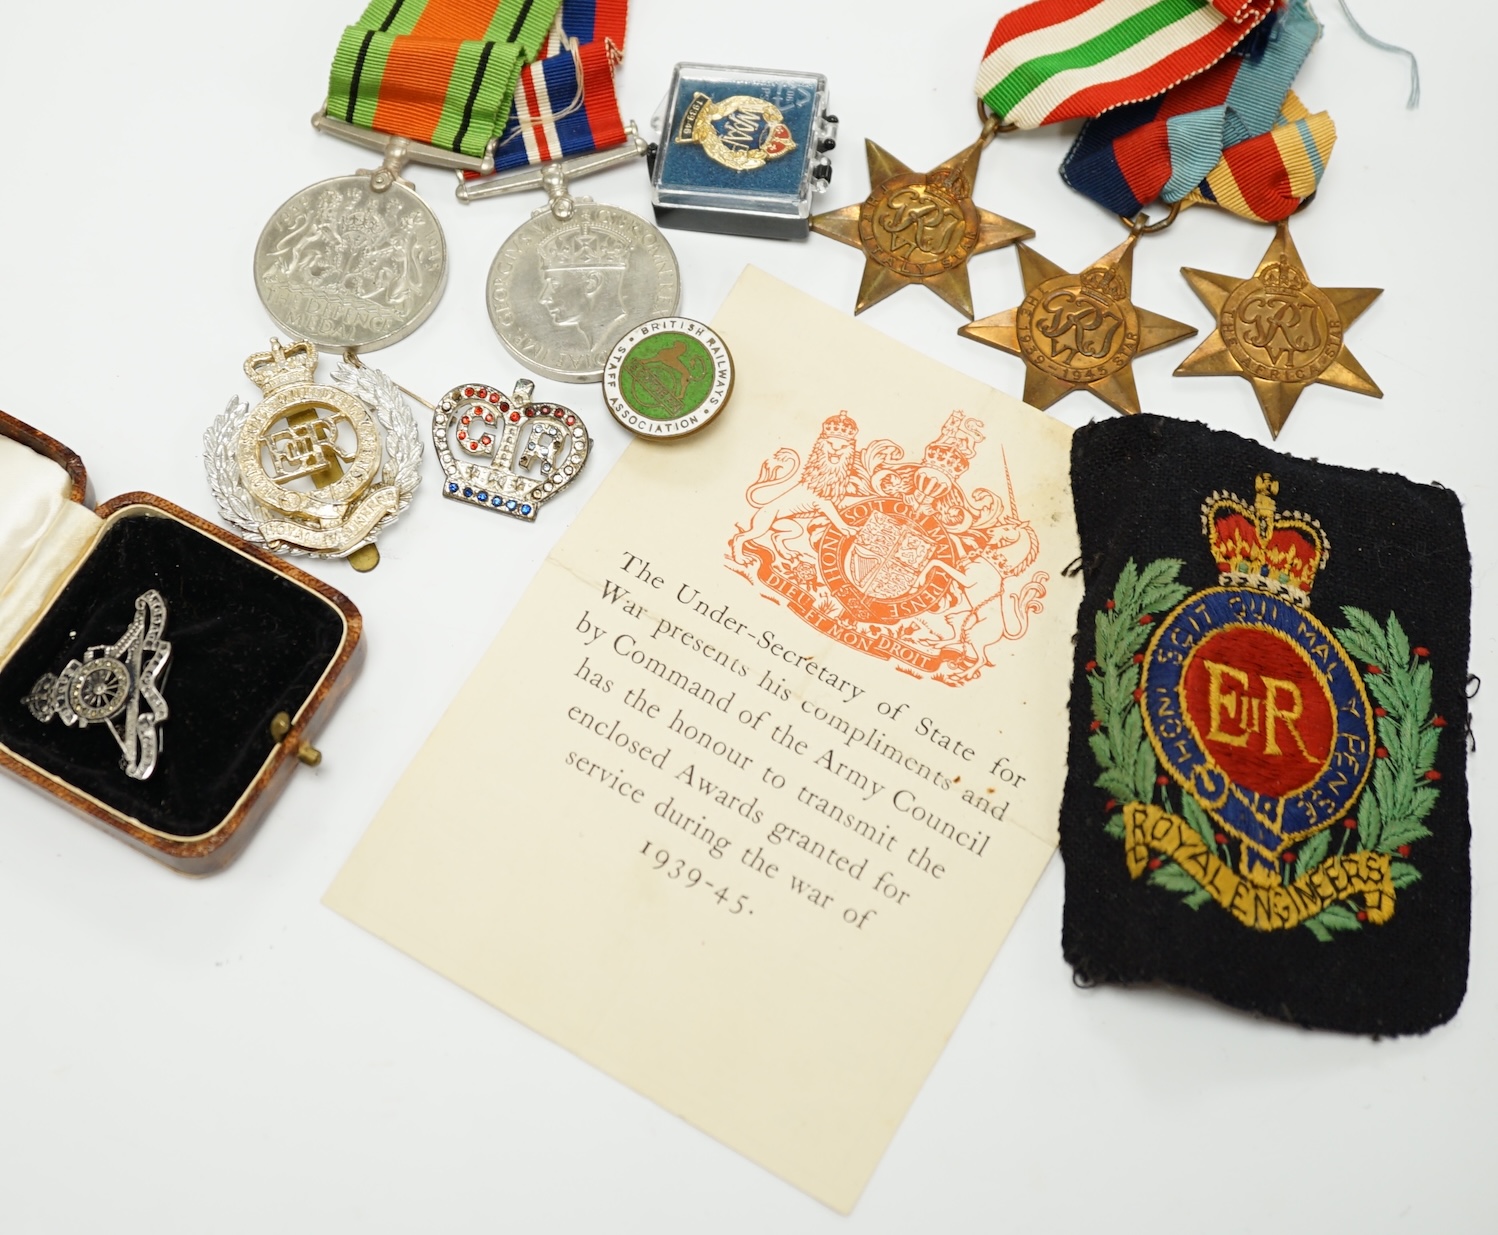 A WWII medal group, comprising of the 1939-1945 War Medal, the Defence Medal, the Africa Star, the Italy Star and the 1939-1945 Star, together with a Royal Artillery sweetheart badge, a cap badge and various other items.